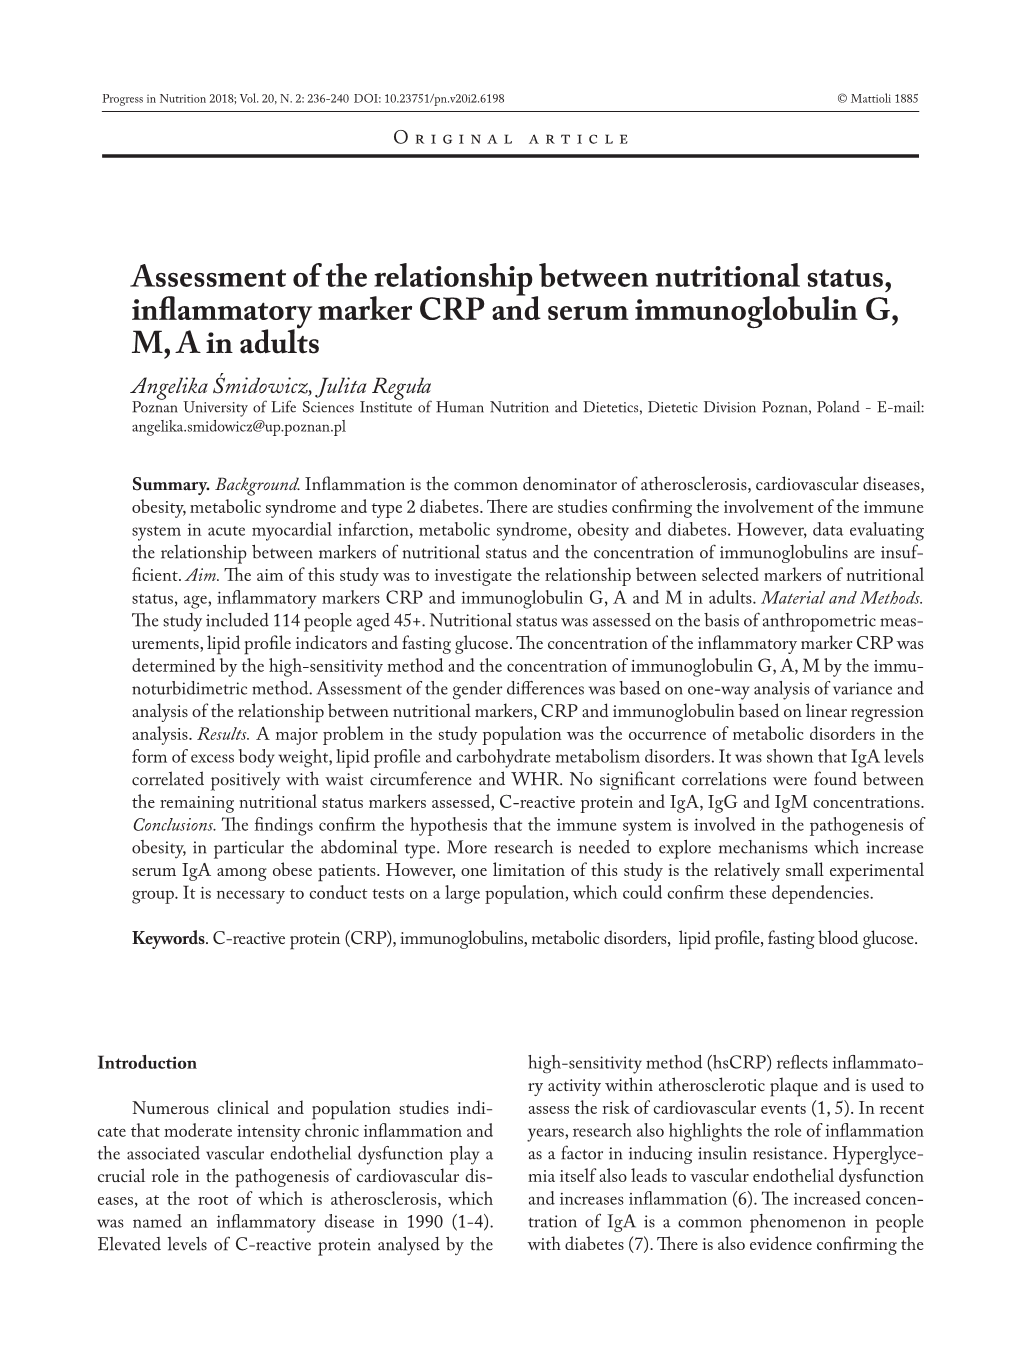 Assessment of the Relationship Between Nutritional Status